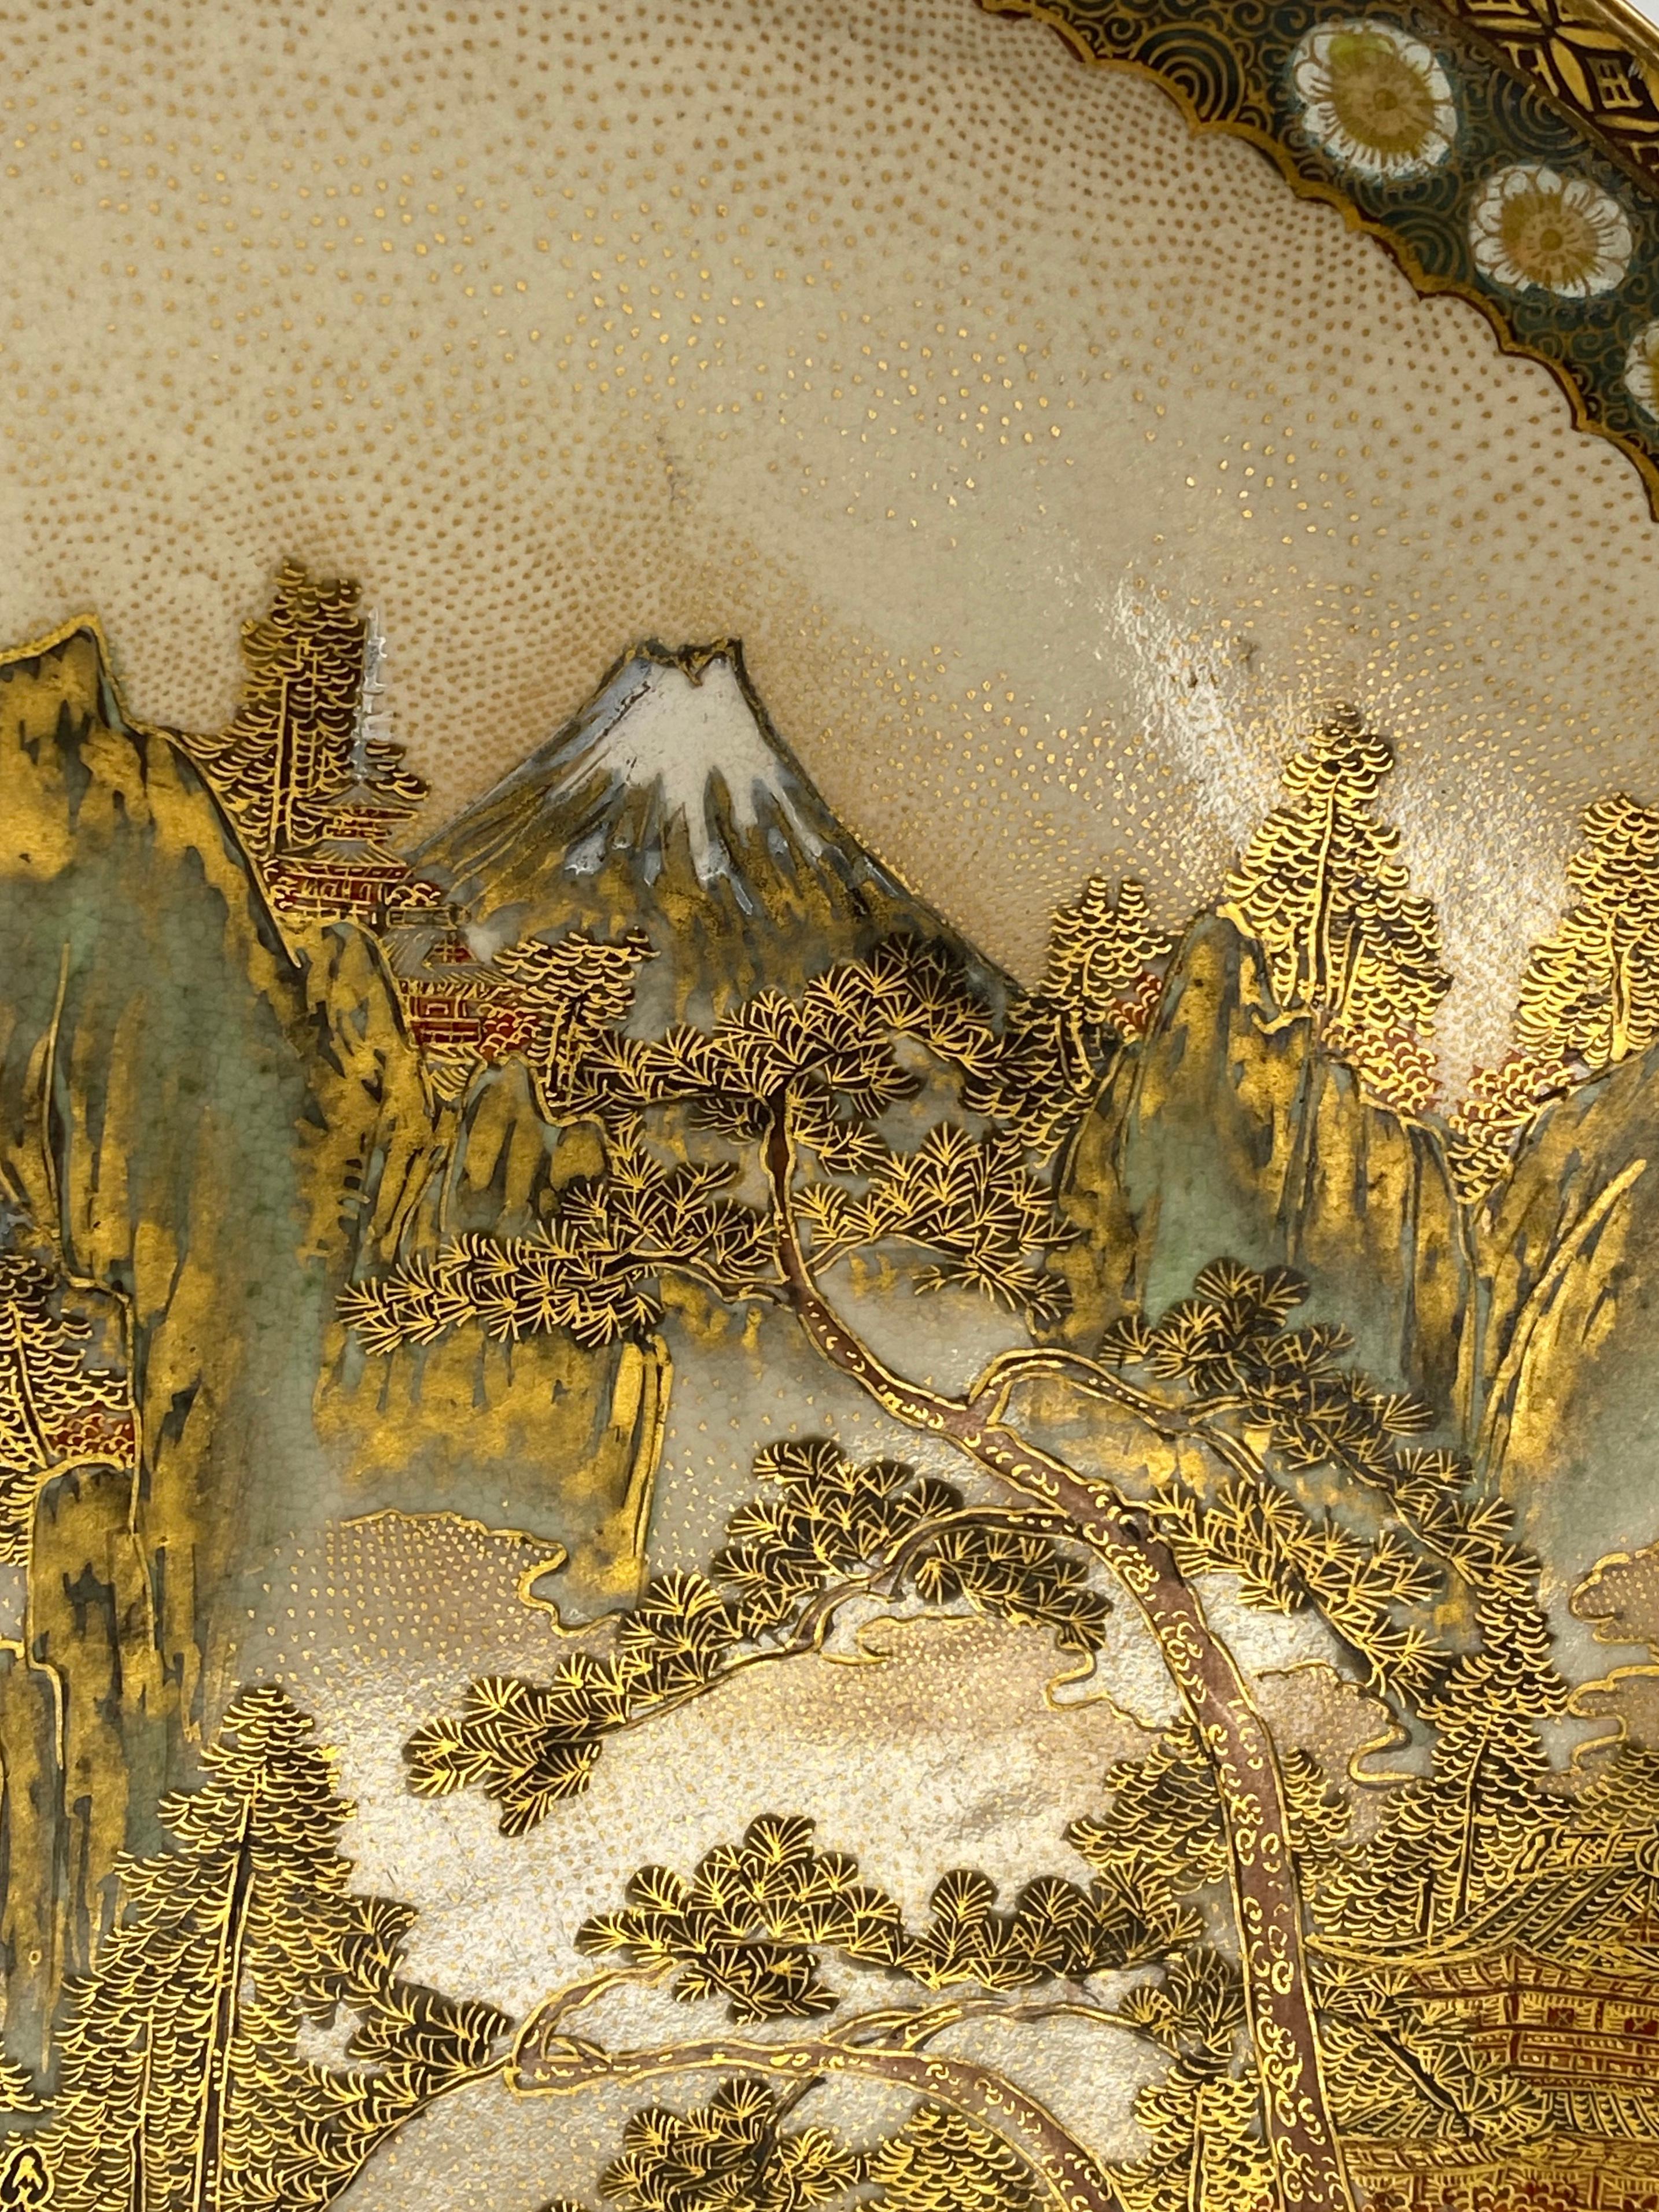 Satsuma pottery plate, Kinkozan, Japan, circa 1900. Meiji period. The plate well painted and gilded, with figures on a promontory, looking towards temples, beneath Mount Fuji. All within an elaborate textile motif border.
Signed to the reverse